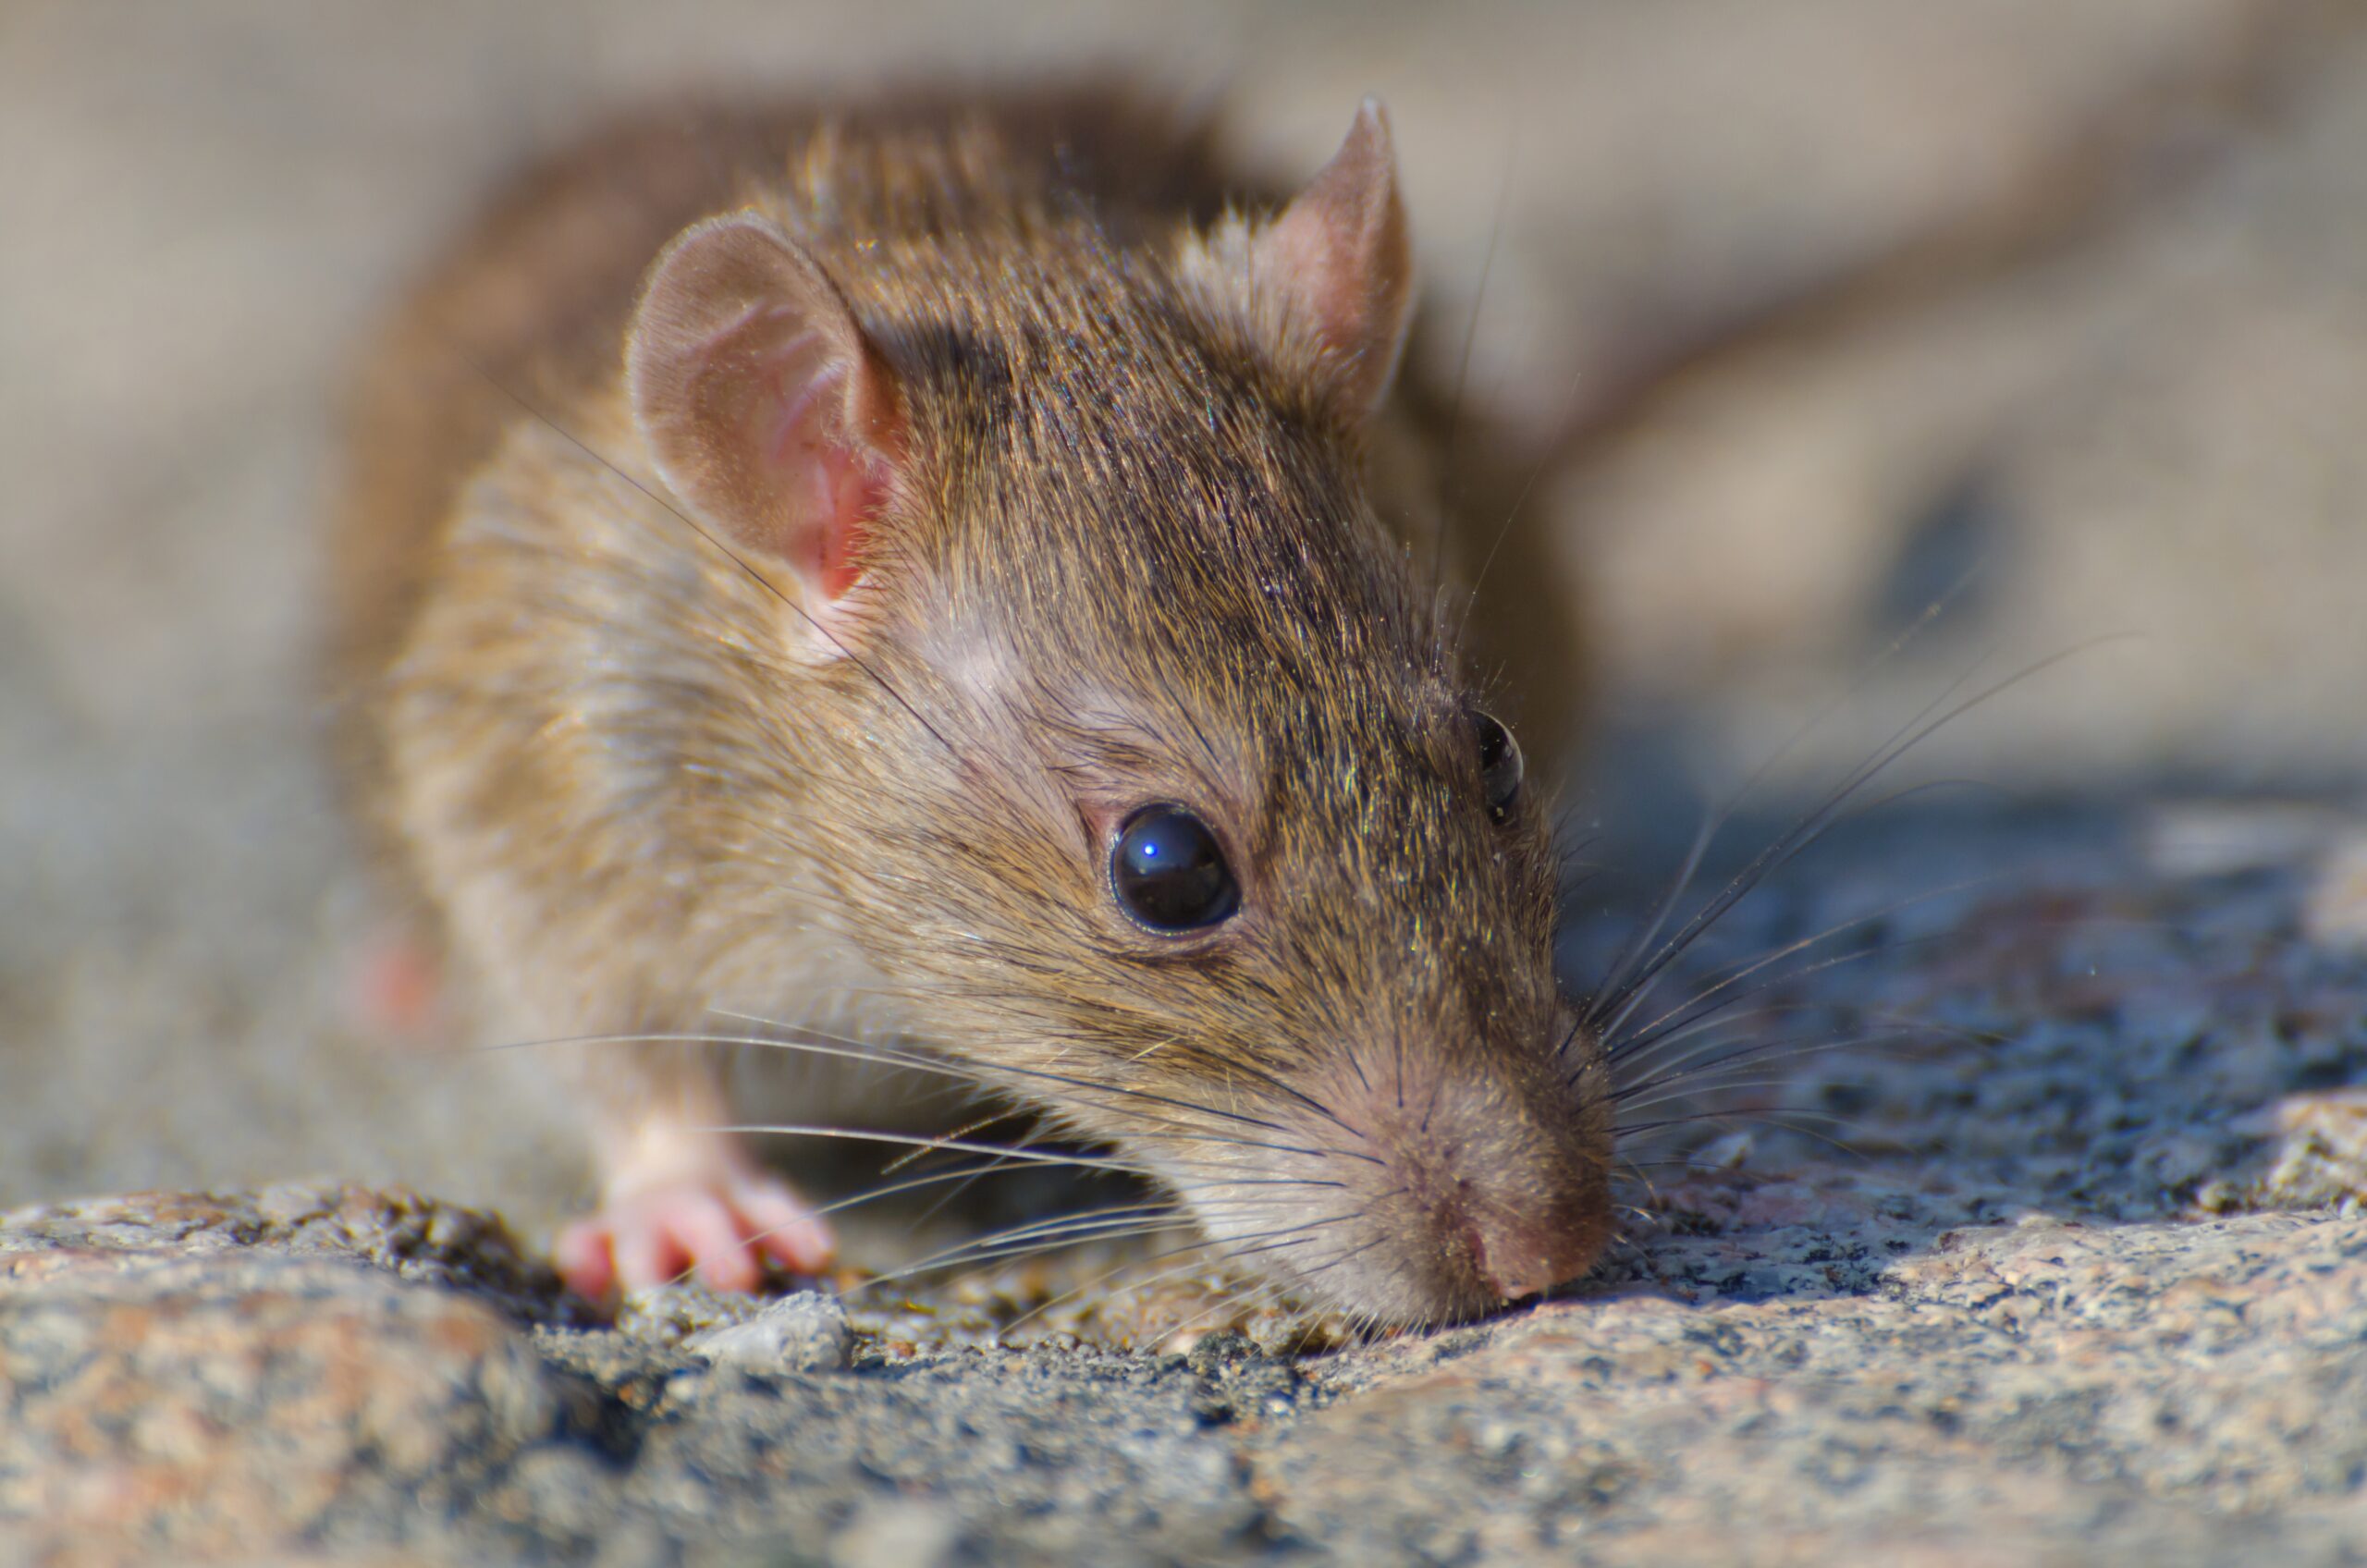 Free Pest Control Service To Combat Domestic Rat Infestations. image